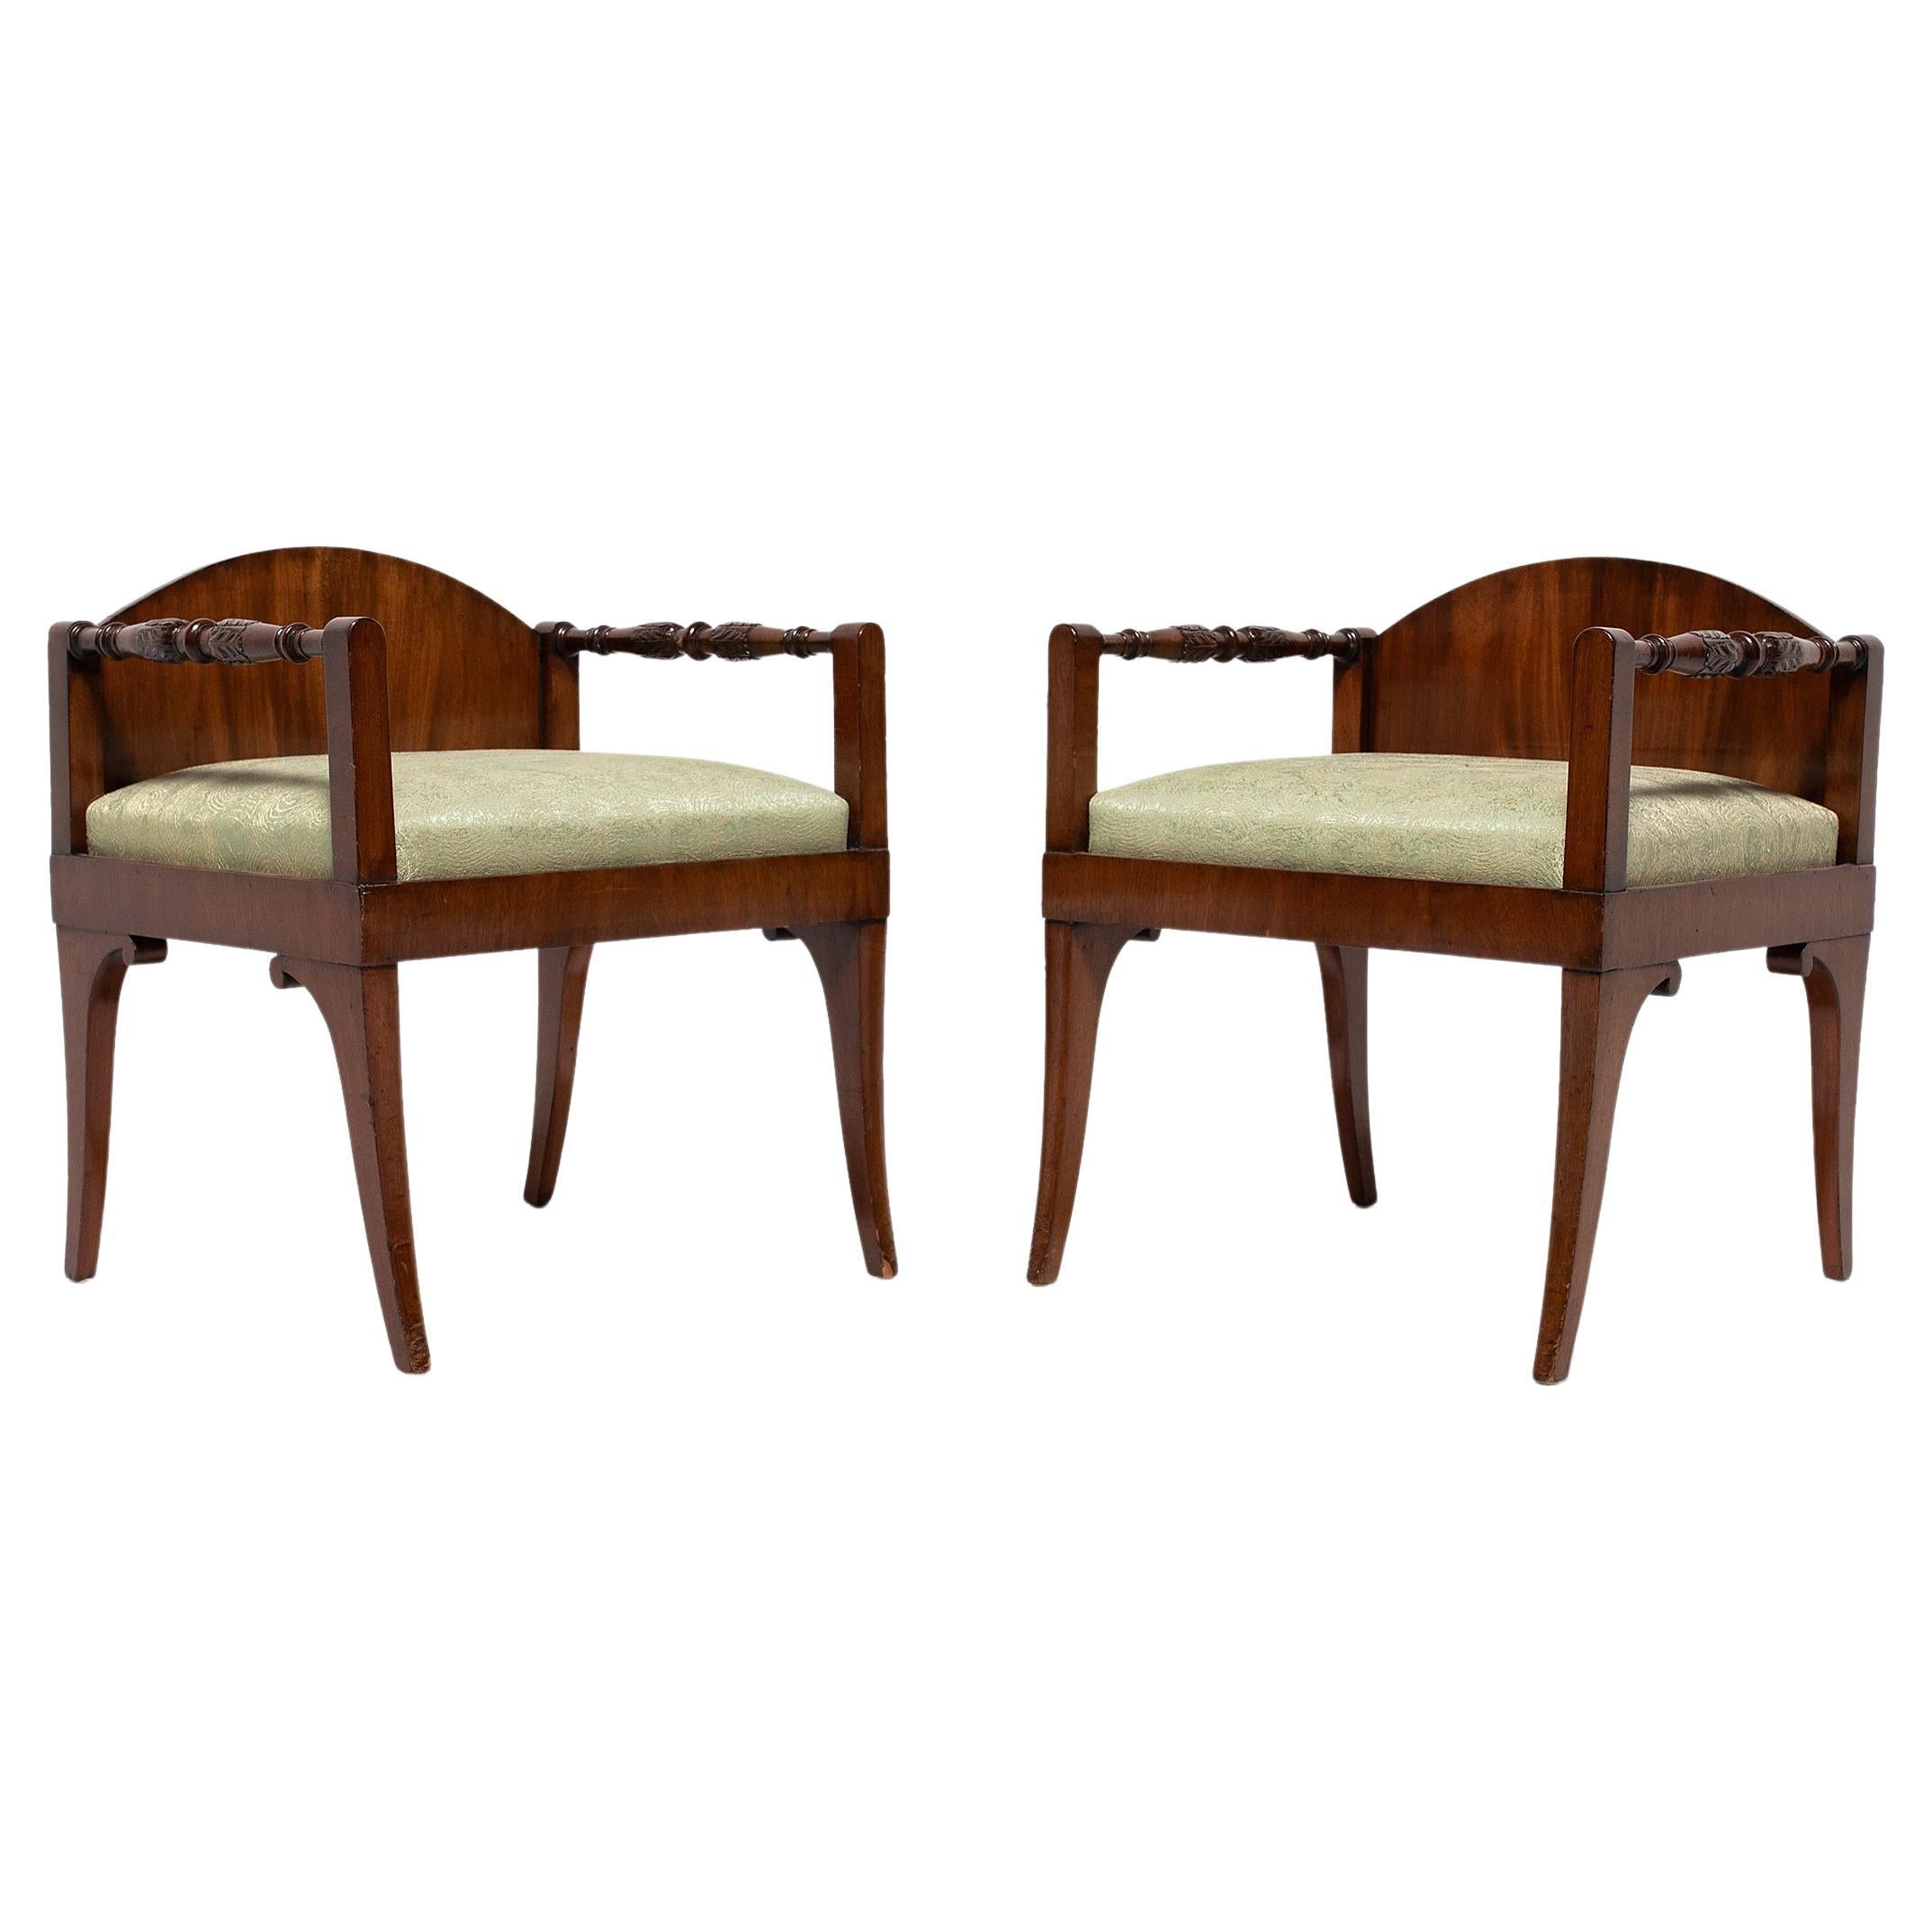 Pair of Neoclassical Low Back Armchairs, c. 1825